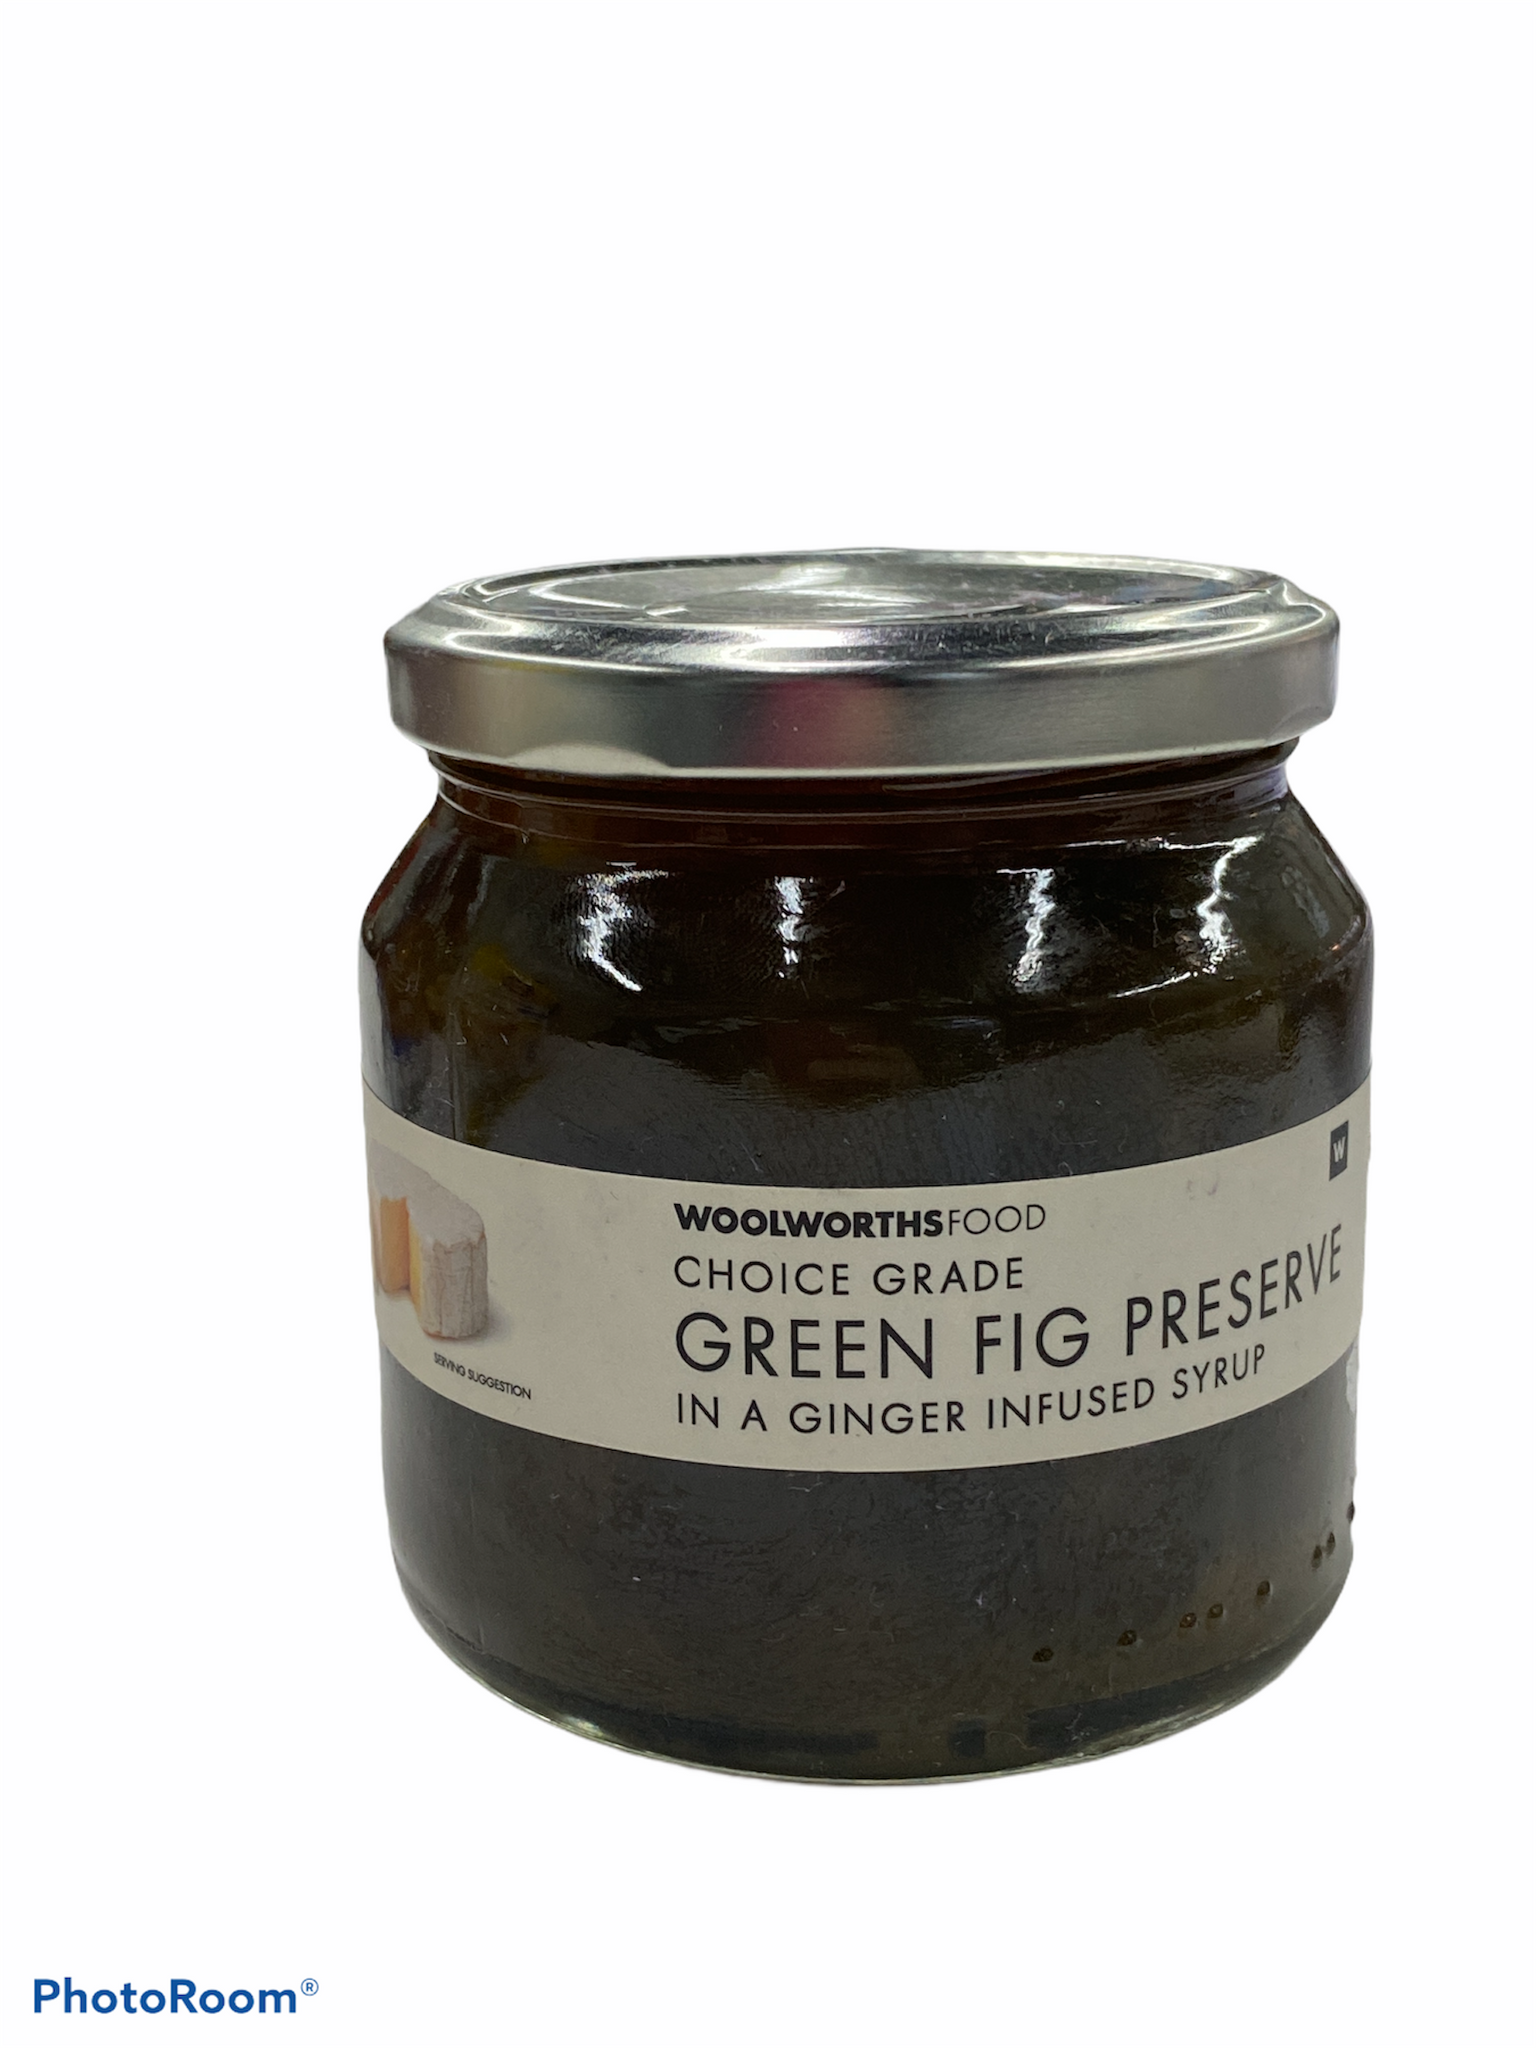 WOOLWORTHS GREEN FIG PRESERVE IN GINGER